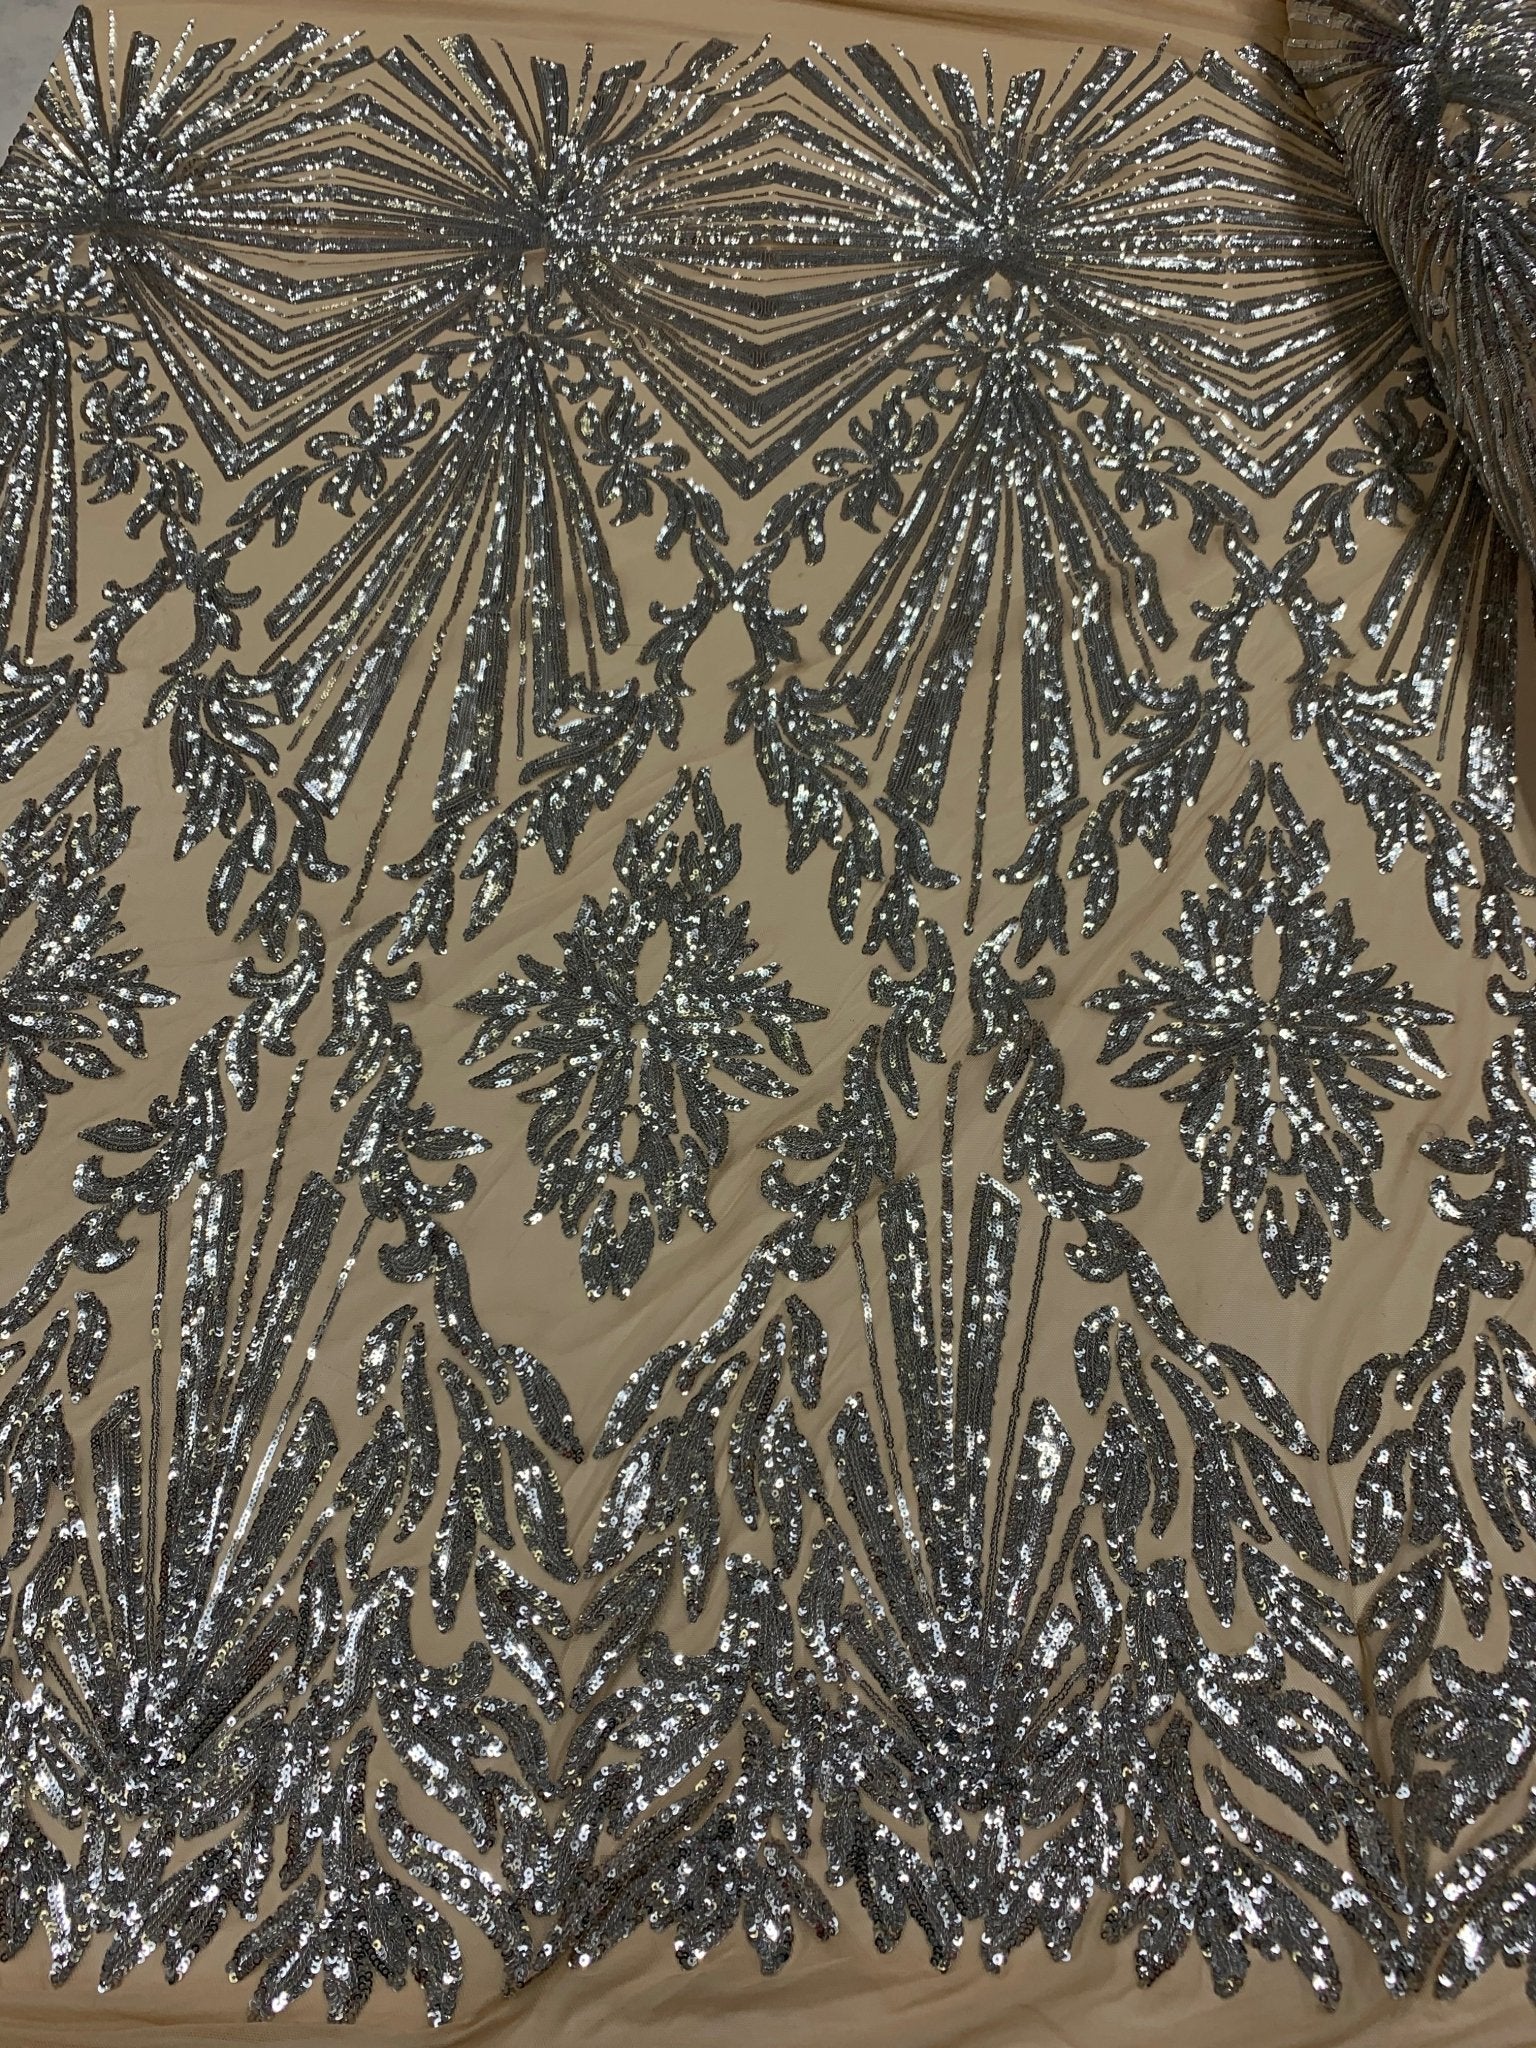 French Embroidery Stretch Sequins Fabric By The Yard on a Mesh LaceICEFABRICICE FABRICSSilver on Nude MeshFrench Embroidery Stretch Sequins Fabric By The Yard on a Mesh Lace ICEFABRIC Silver on Nude Mesh